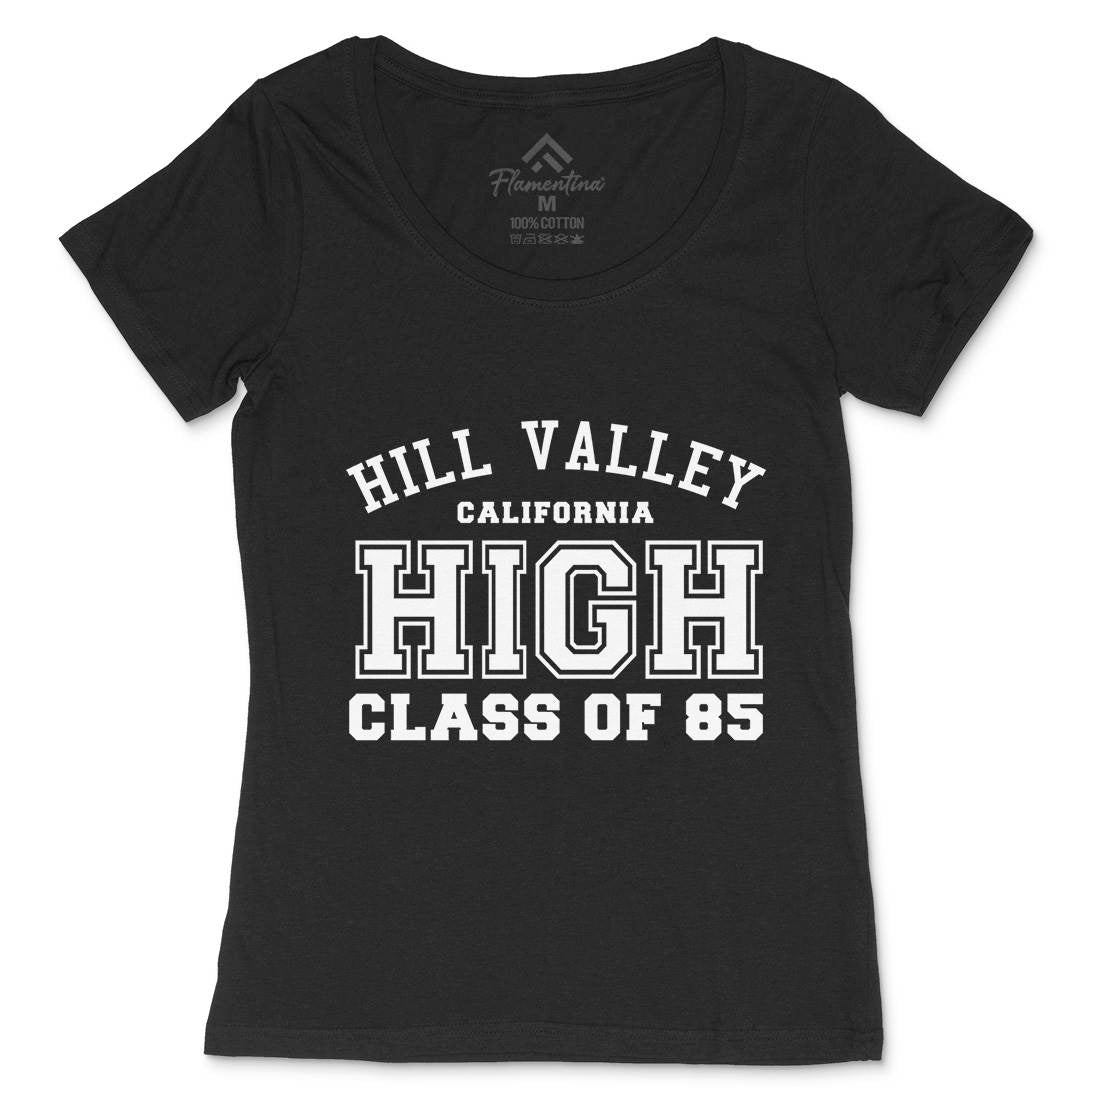 Hill Valley Womens Scoop Neck T-Shirt Space D113